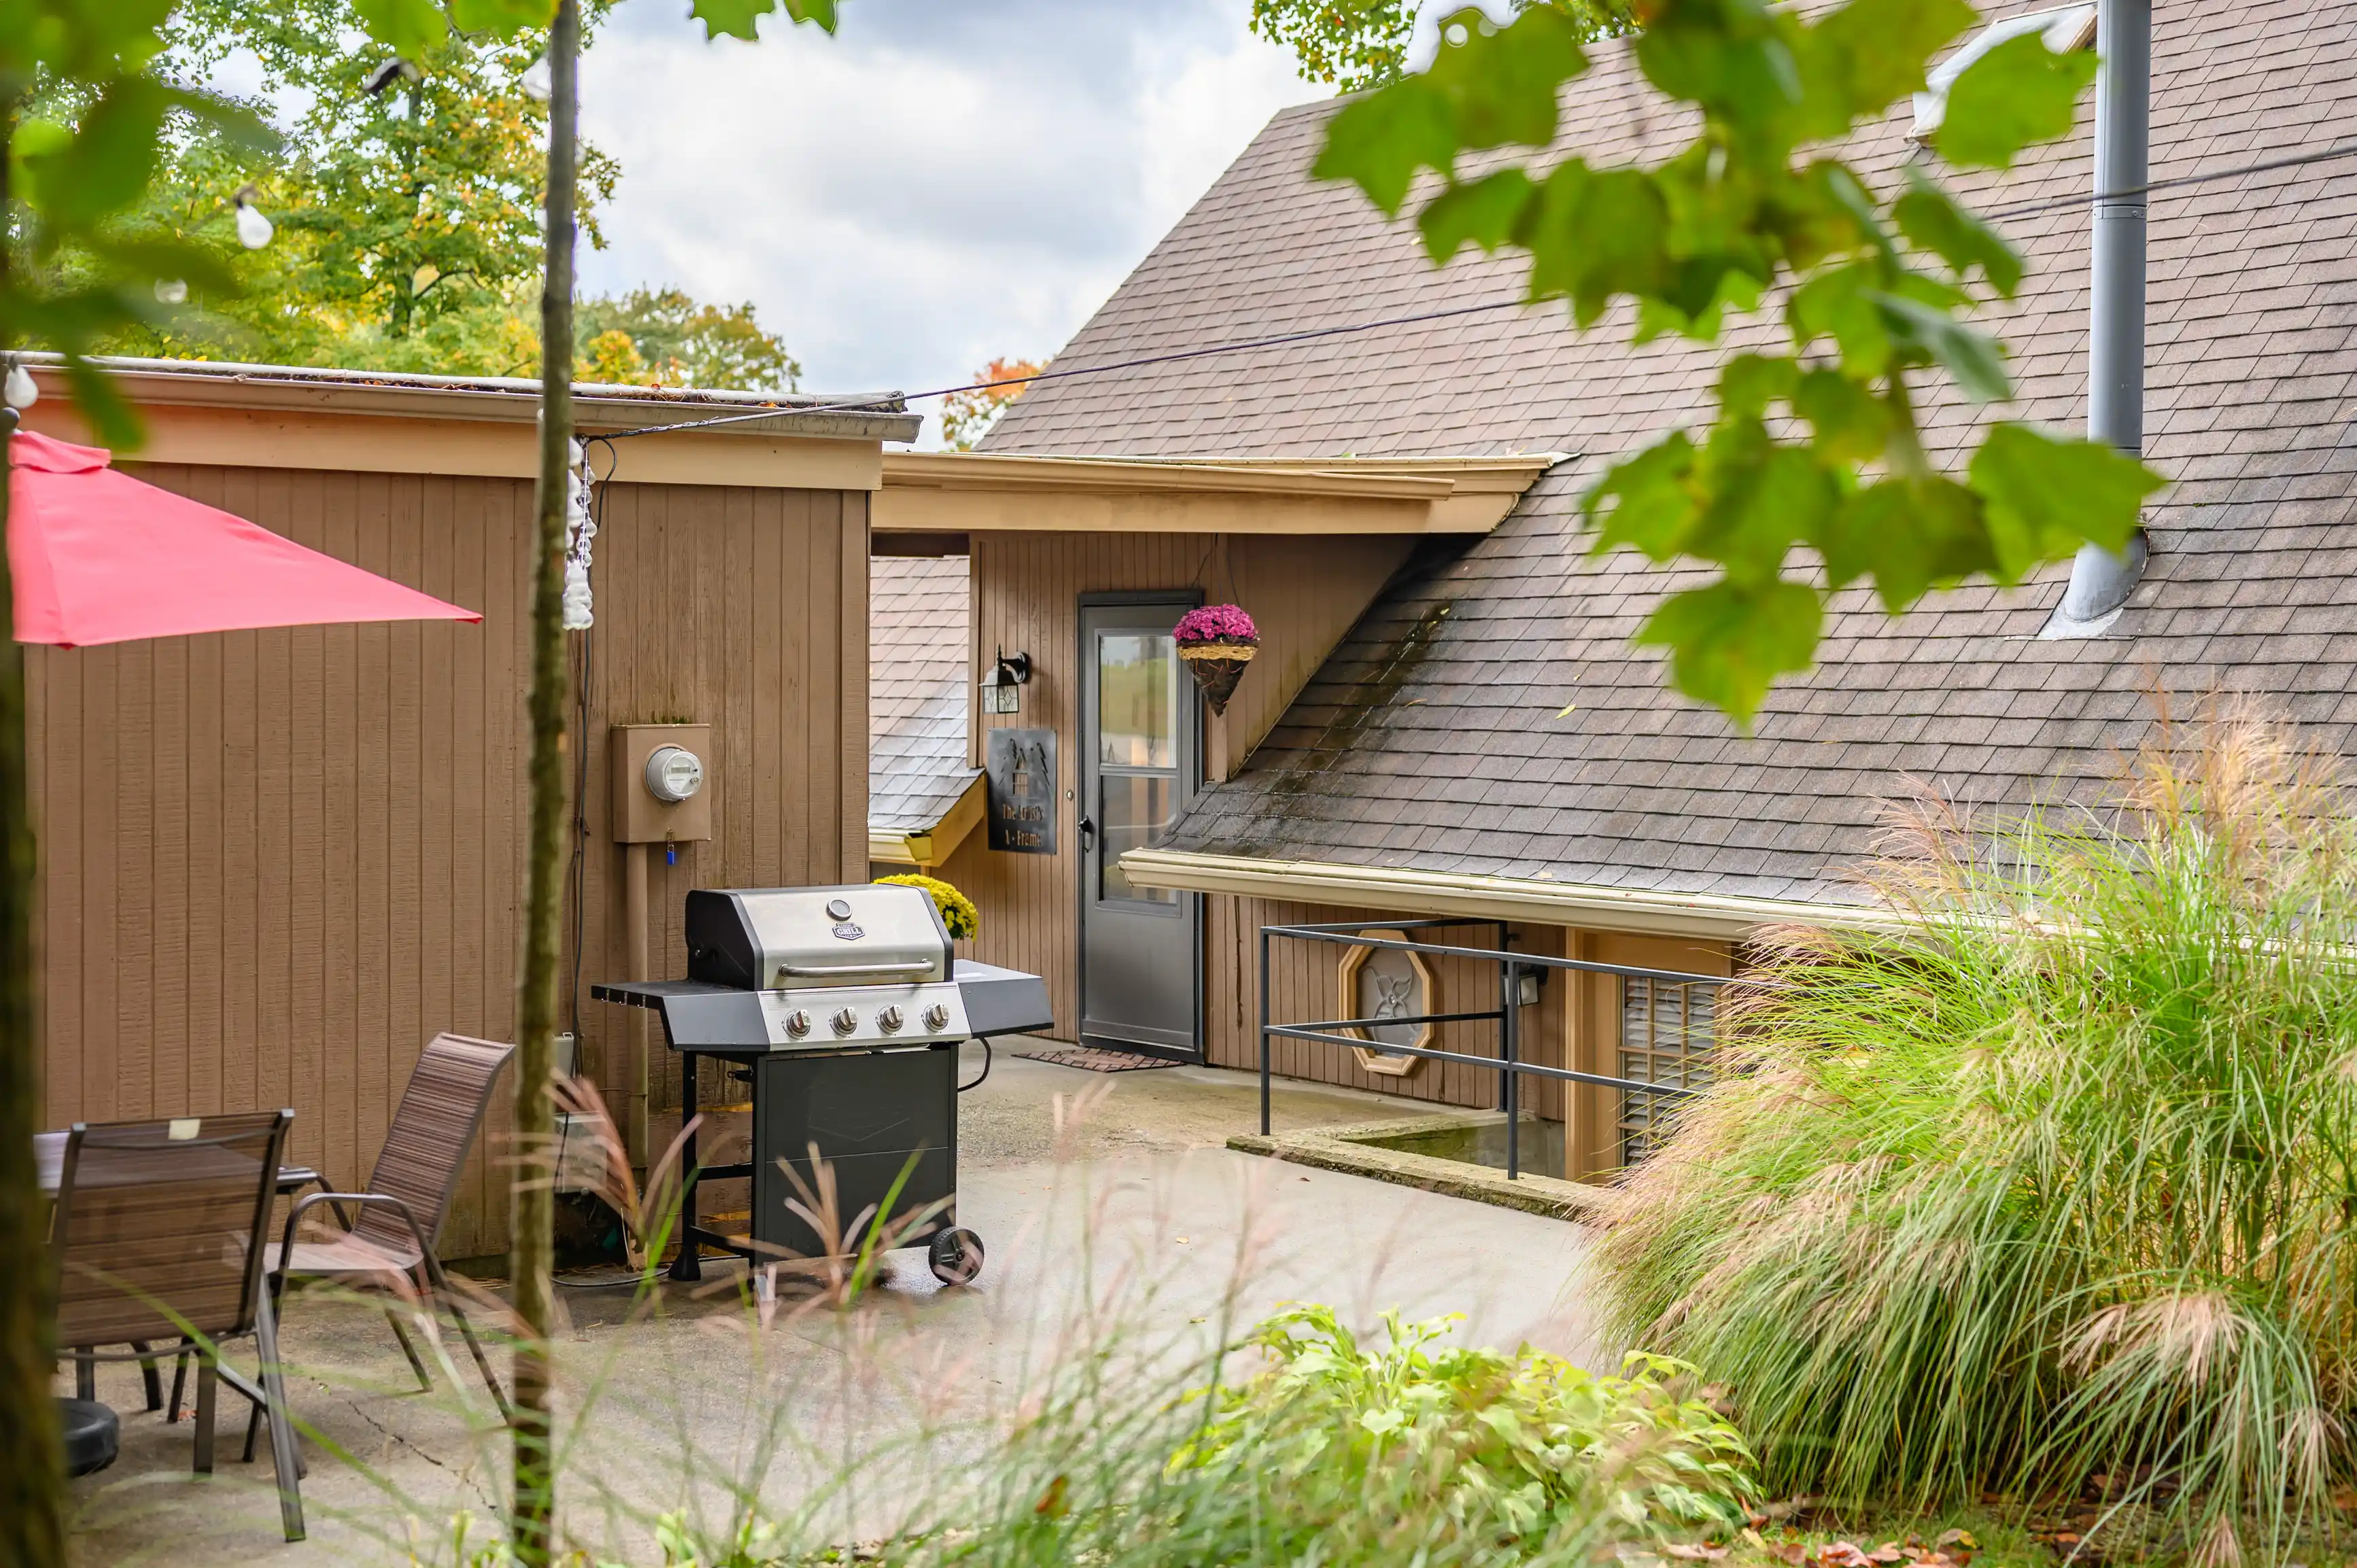 Cozy backyard patio area with a barbecue grill, outdoor furniture, and large umbrella next to a house with a person visible through the door window.